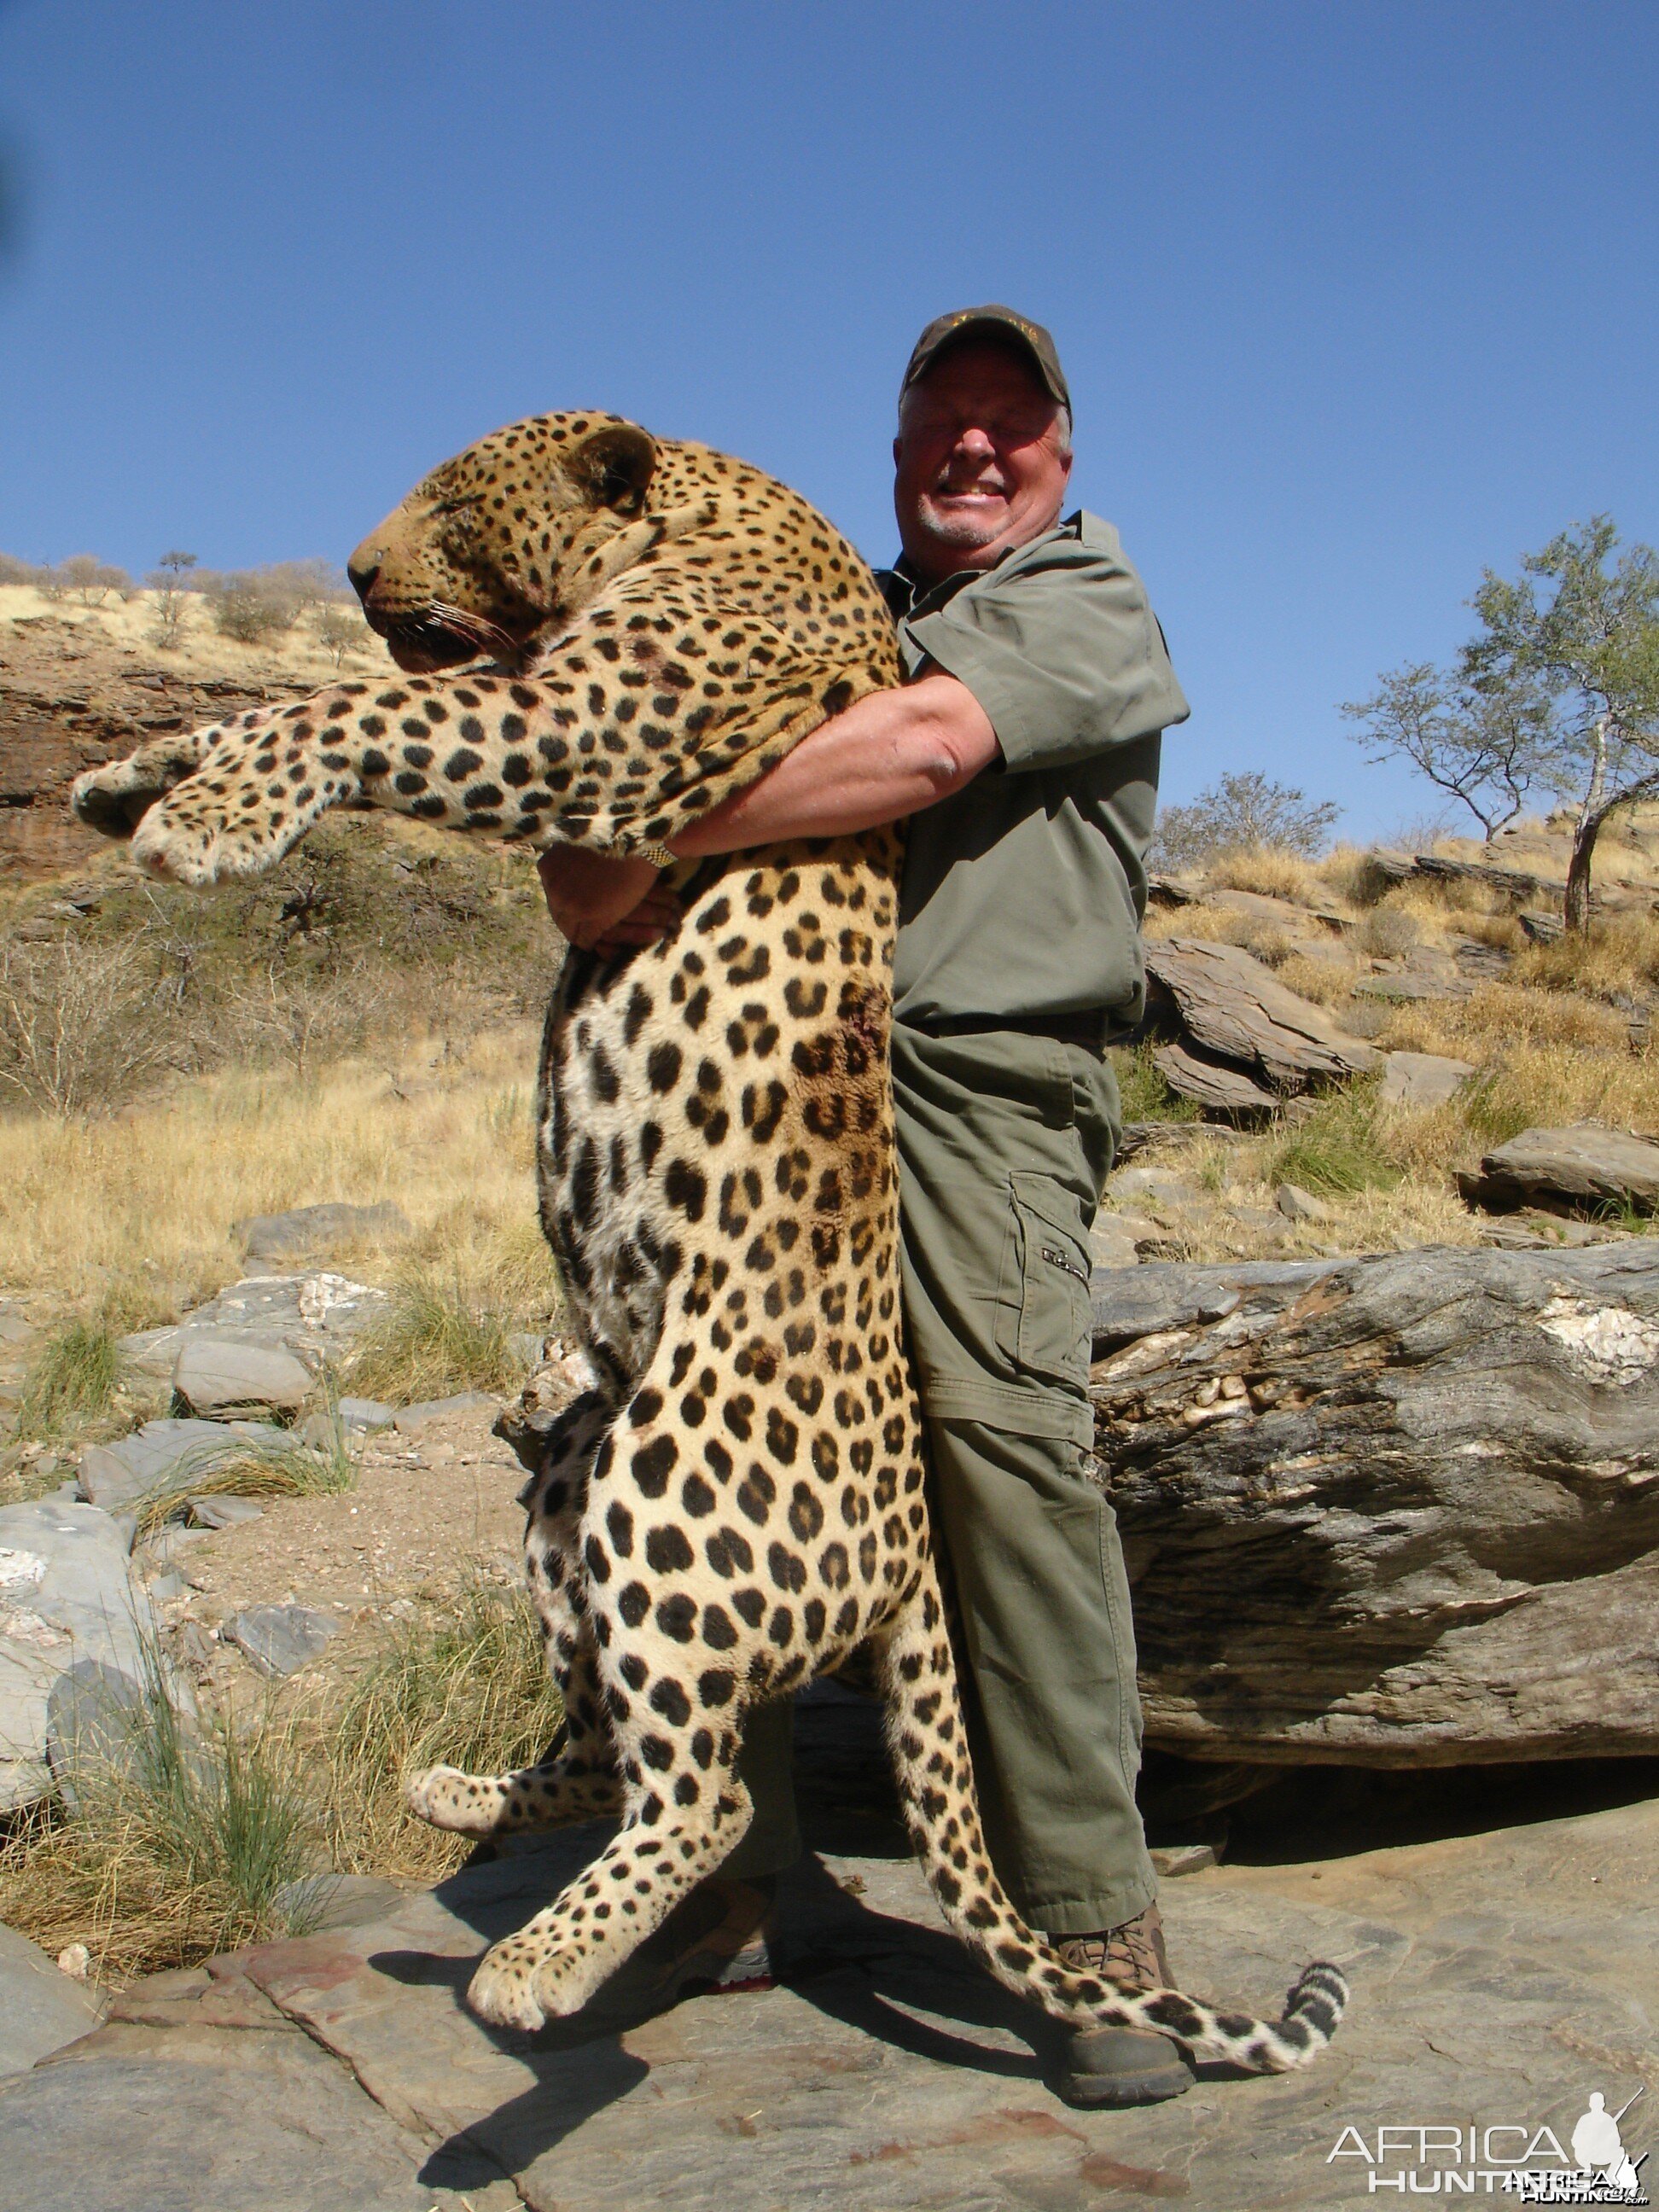 Brad Smiths Leopard Tracked by Sparks Hounds - another view of the monster